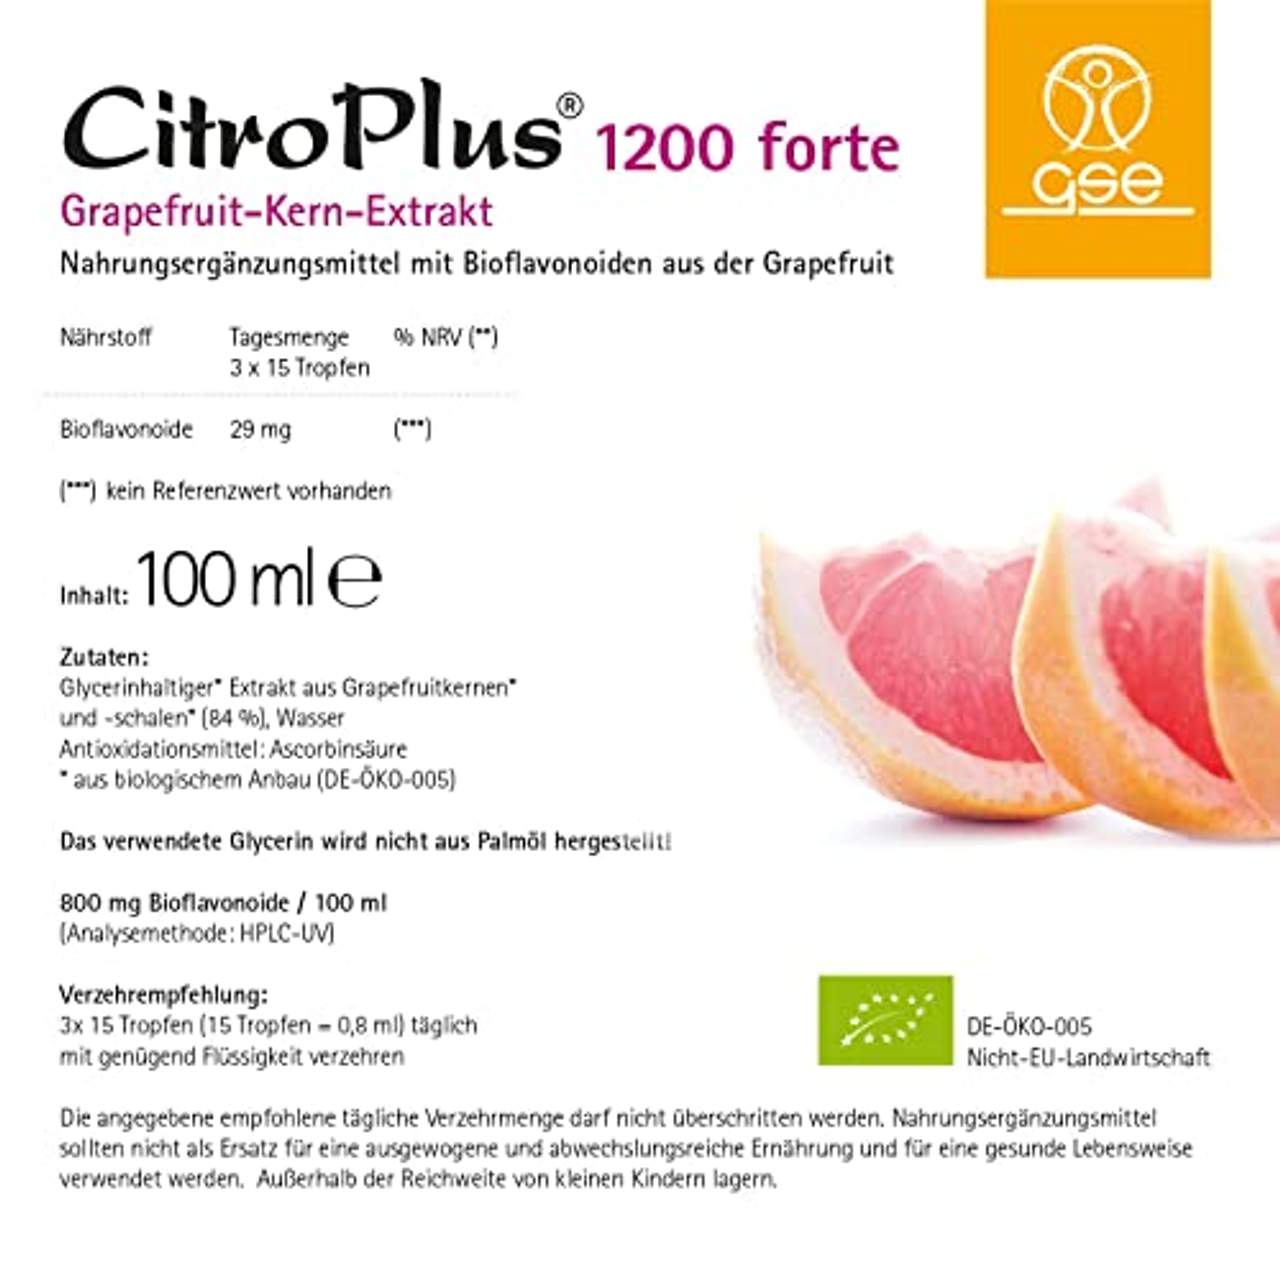 GSE CitroPlus forte 1200 mg